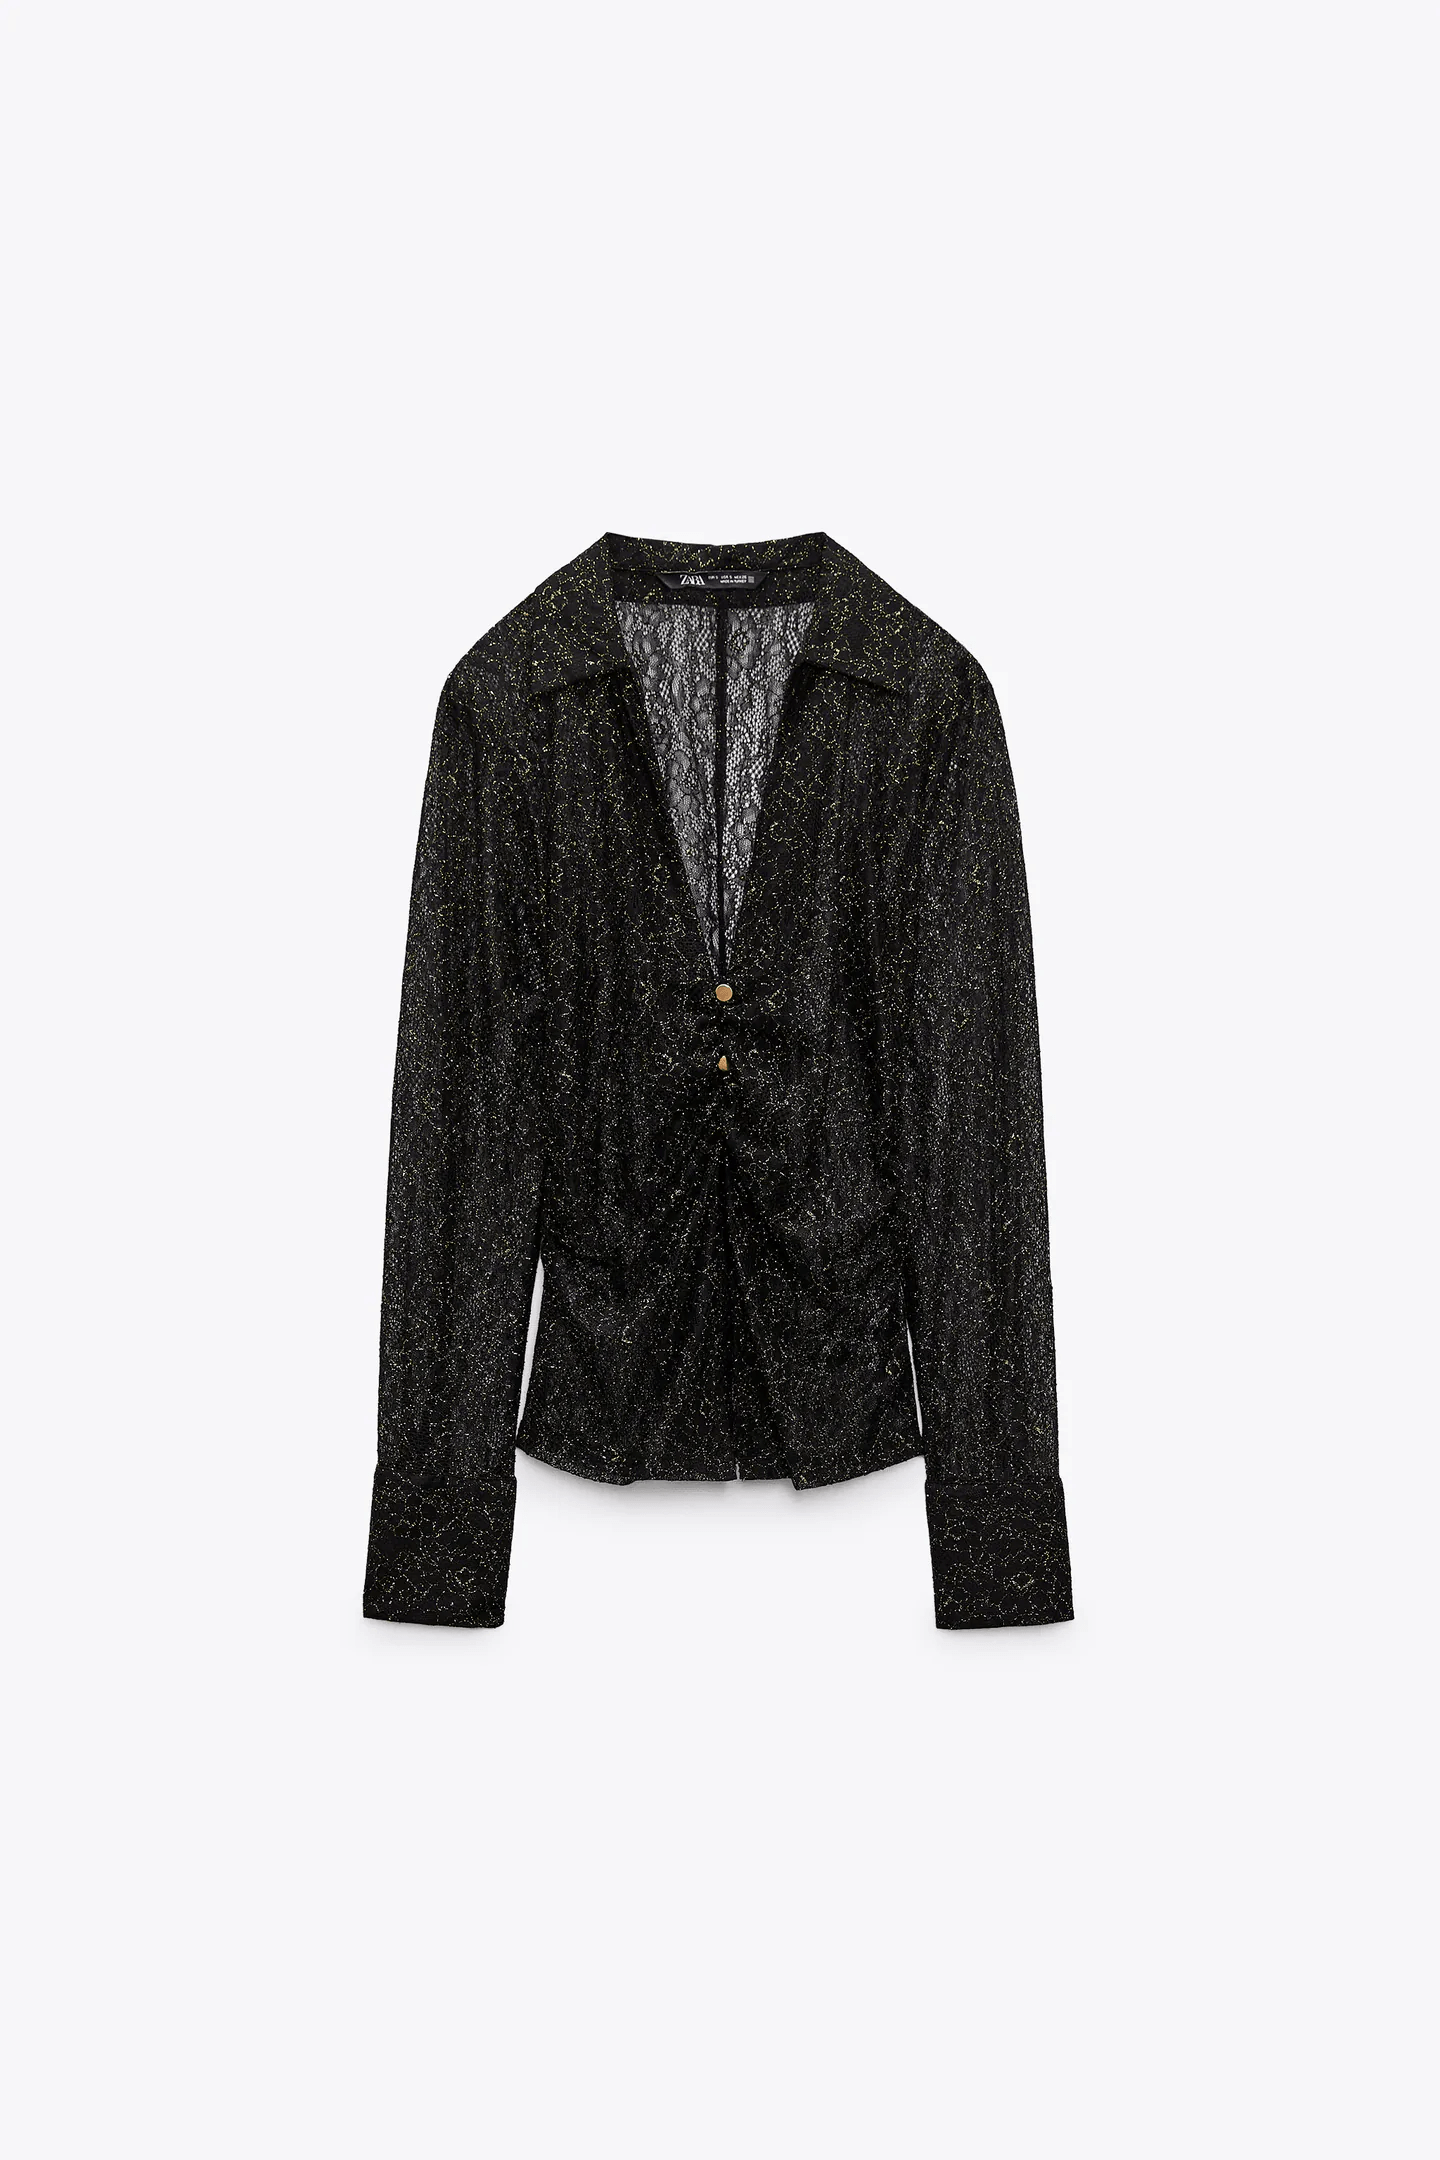 Zara Lace Shirt With Gold Buttons